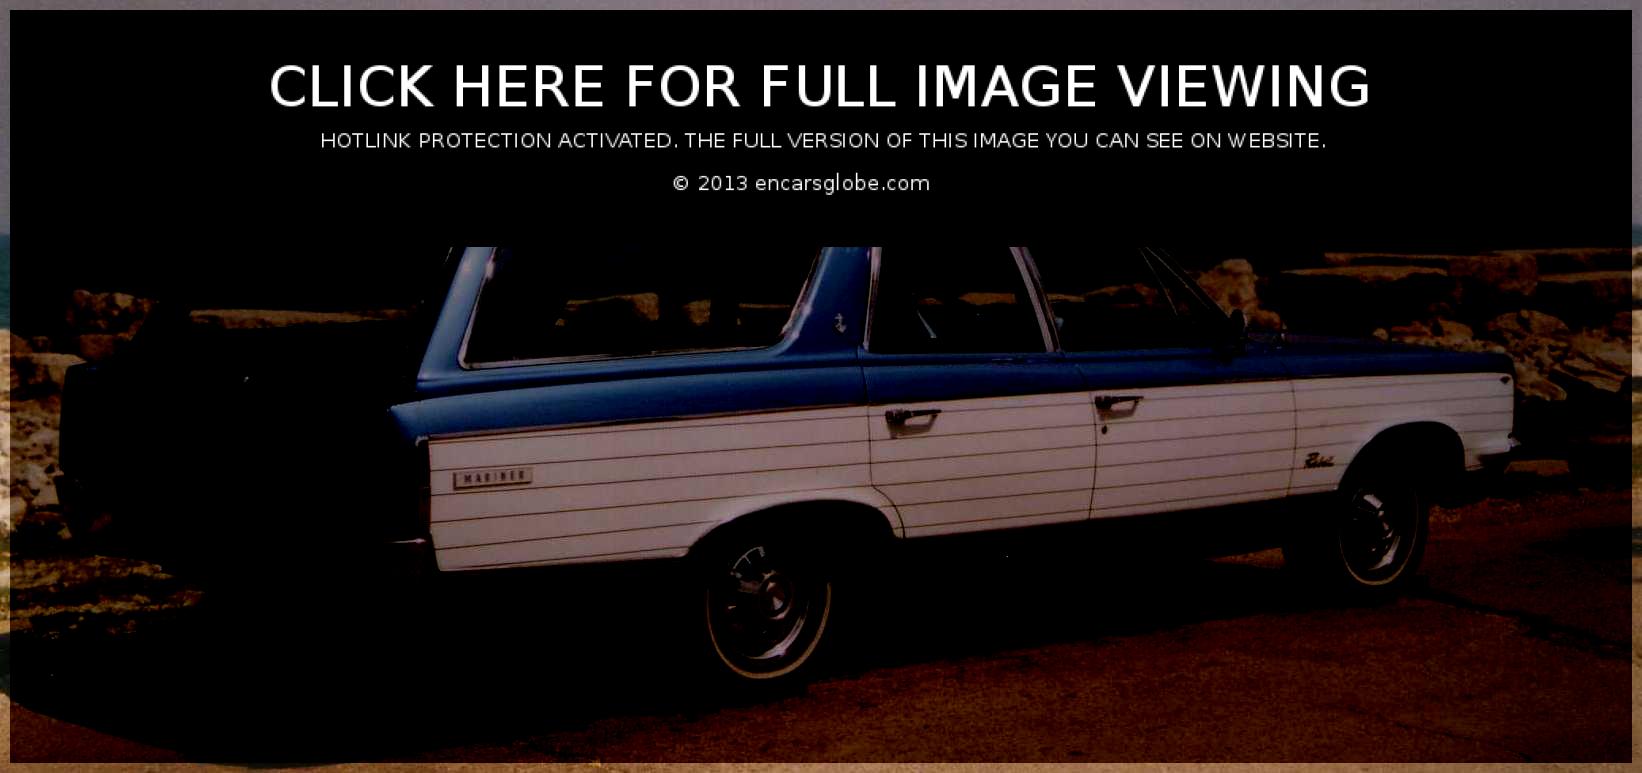 Rambler Rebel Super wagon Photo Gallery: Photo #03 out of 11 ...